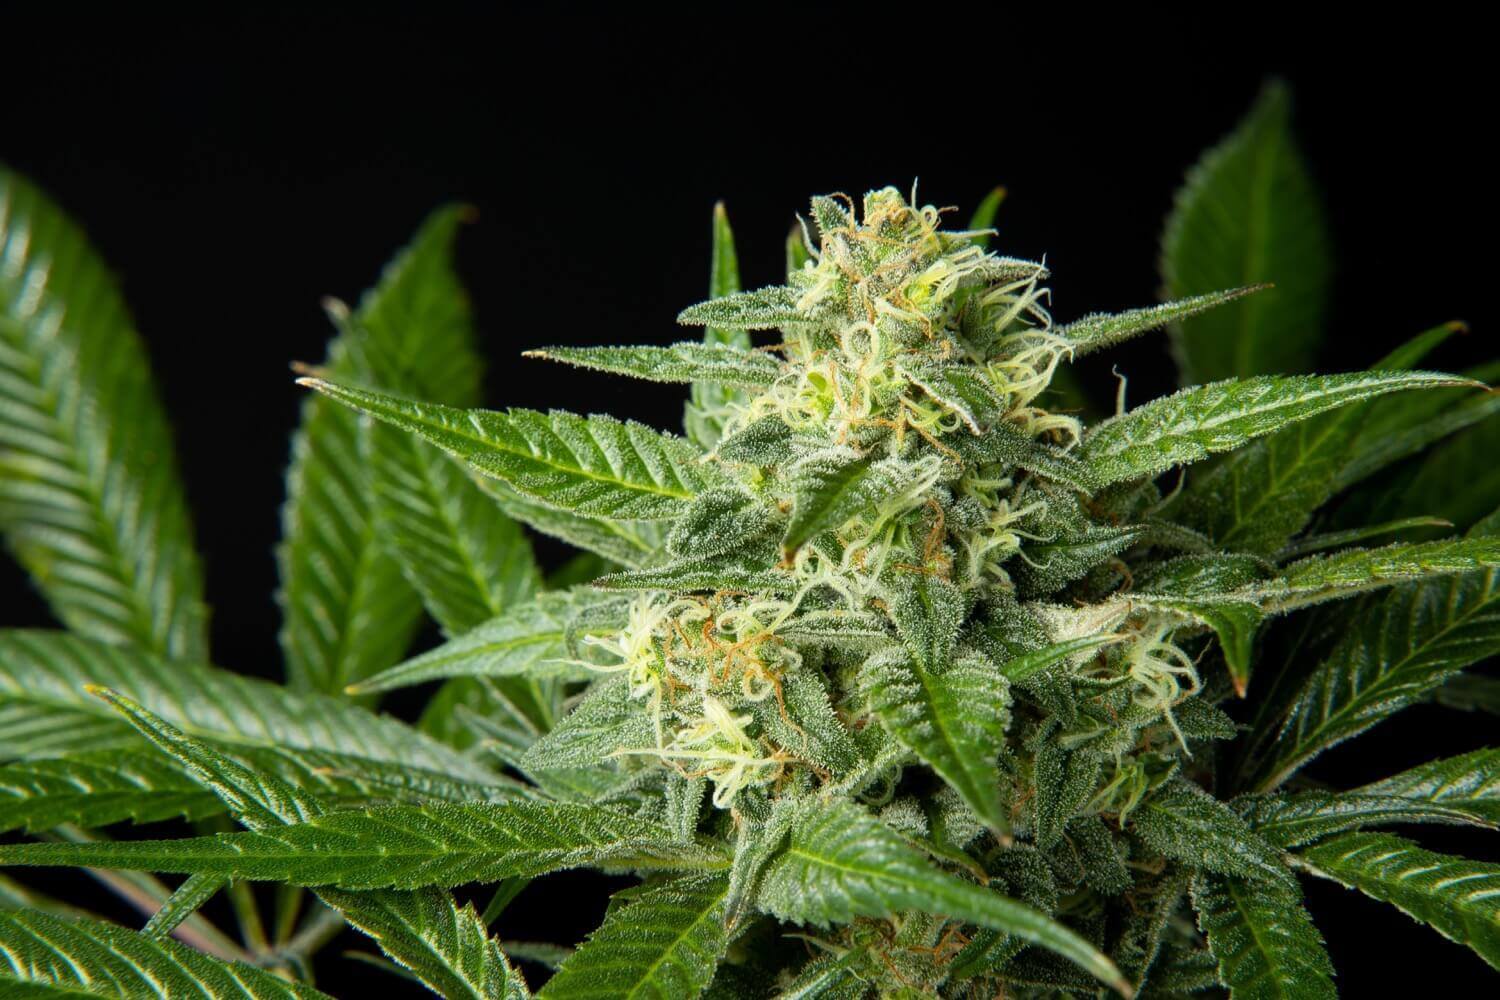  Varieties like Pure CBD Punch by Philosopher Seeds have a very high CBD content, and hardly any THC